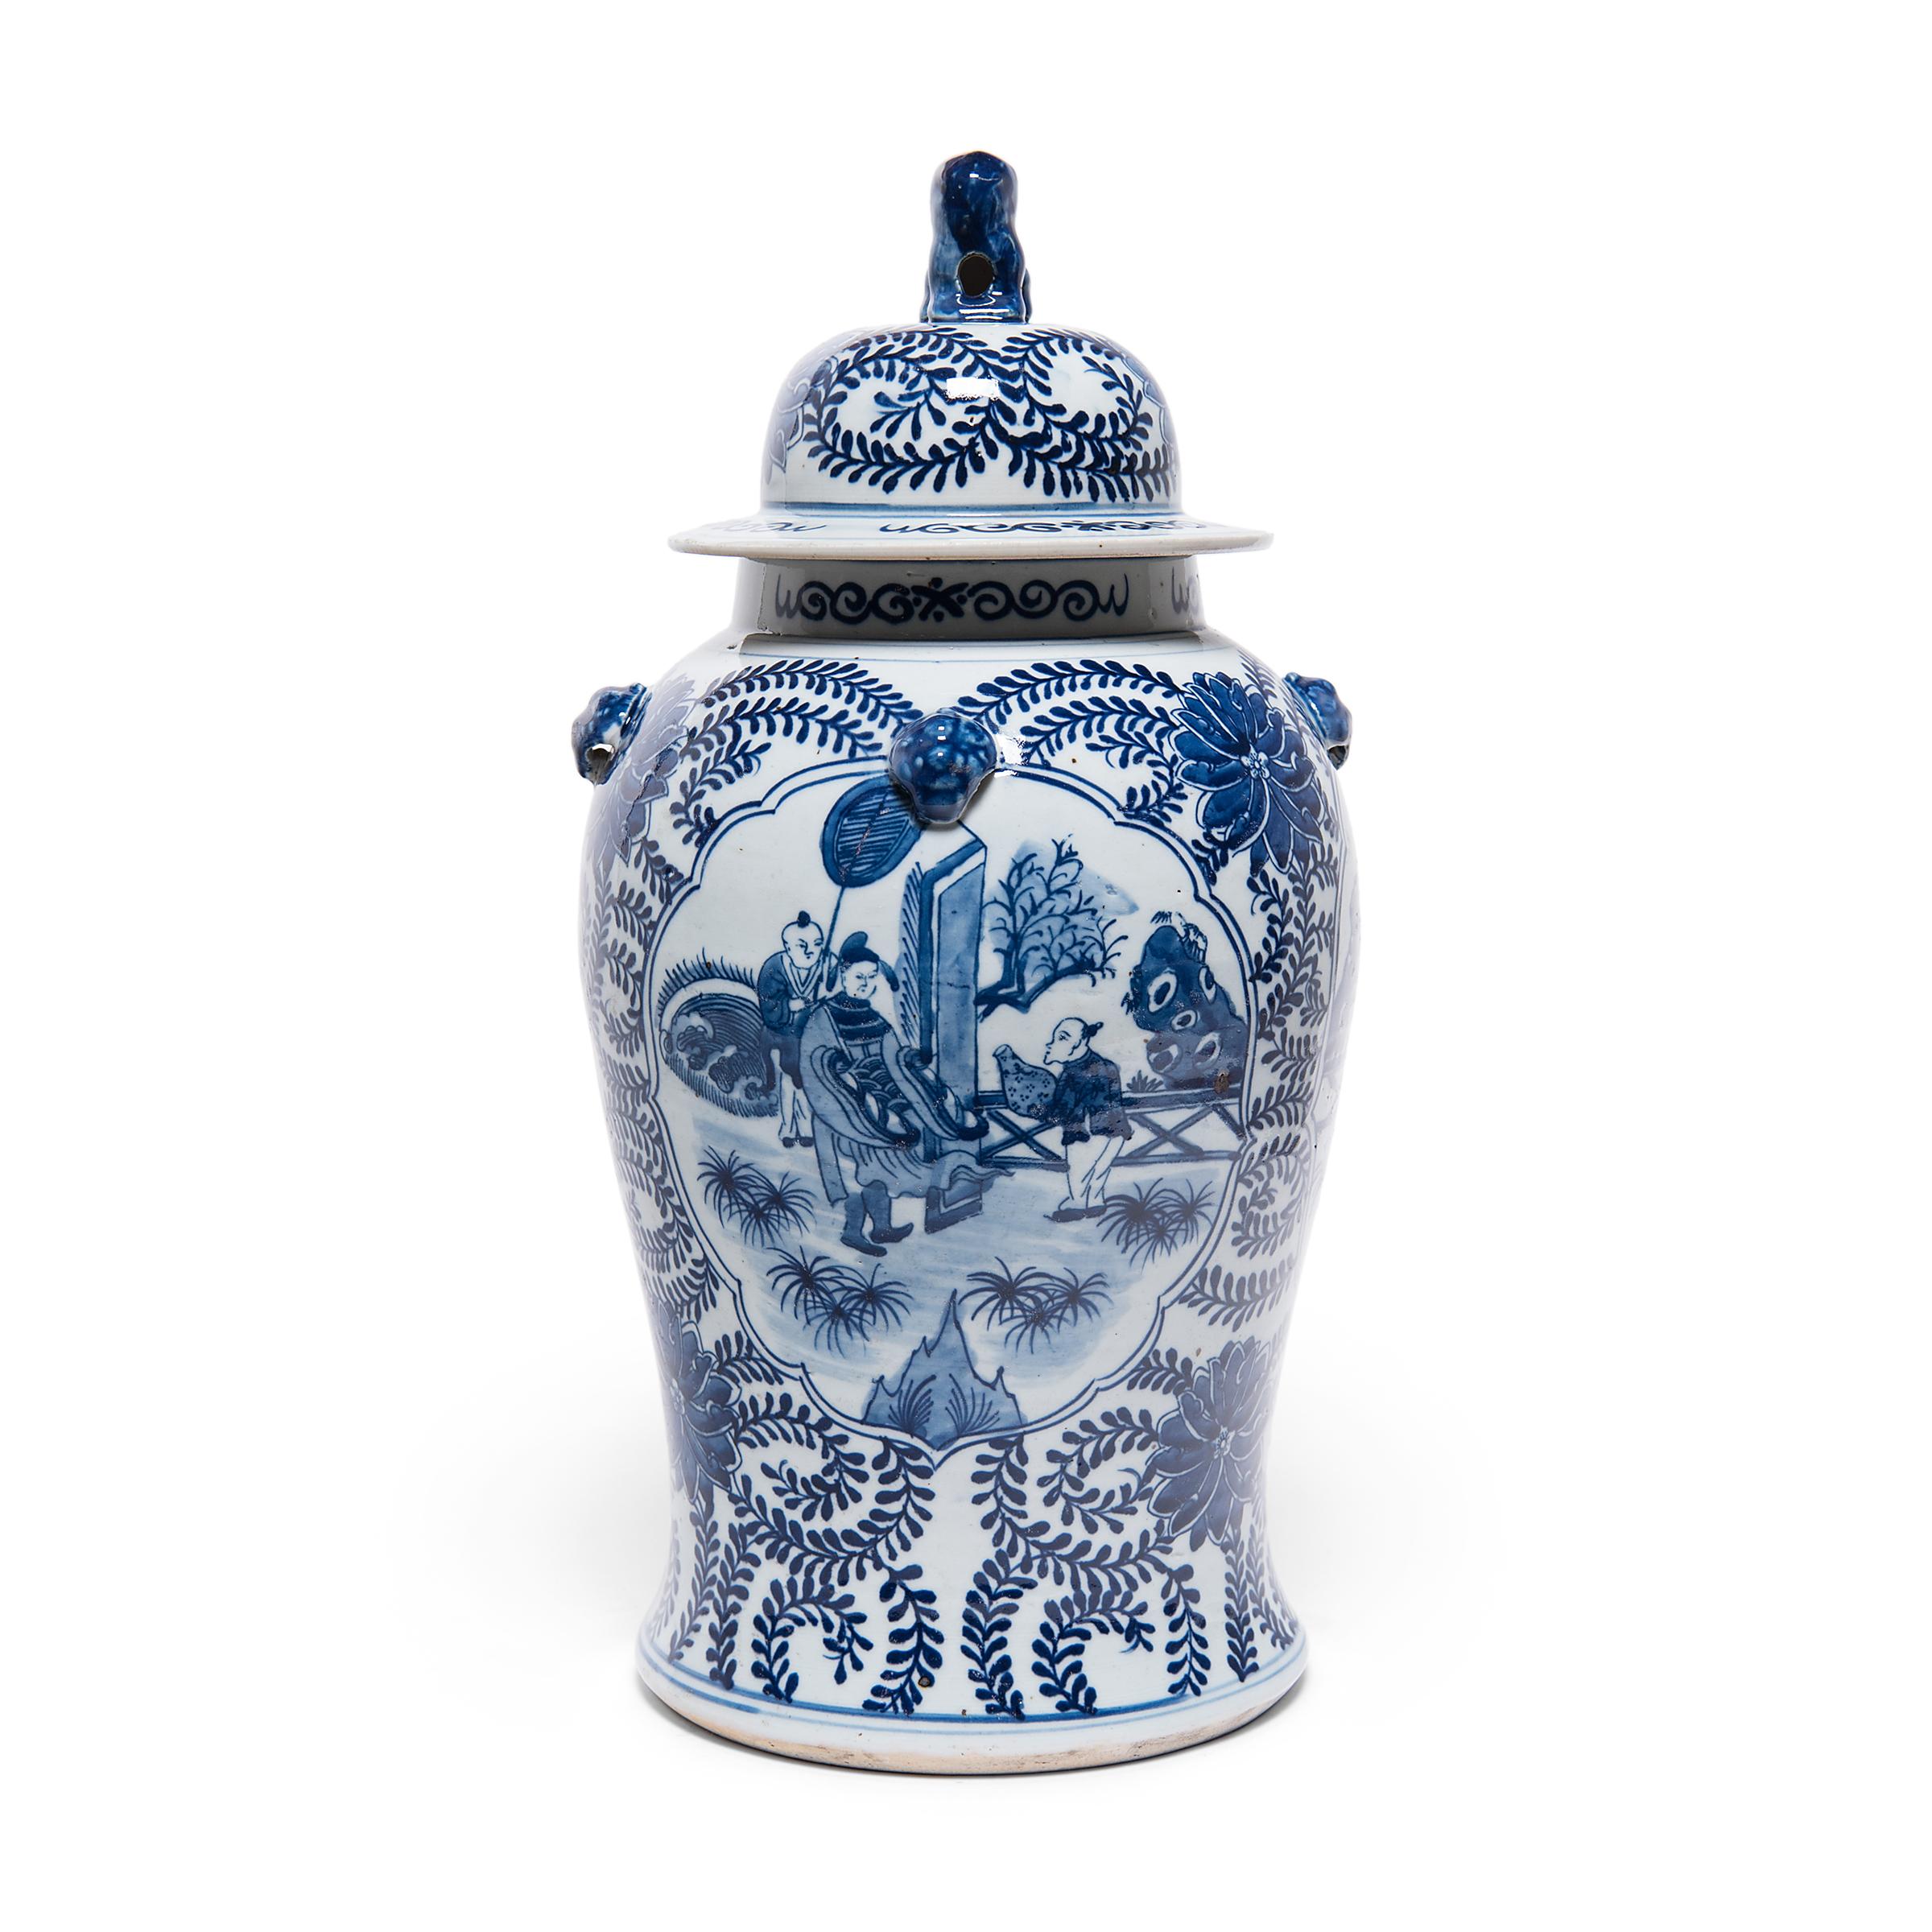 These contemporary lidded baluster jars continue the centuries-old tradition of Chinese blue-and-white porcelain ware. Painted with cobalt pigments for a brilliant blue finish, each jar is densely patterned with trailing vine scrollwork and